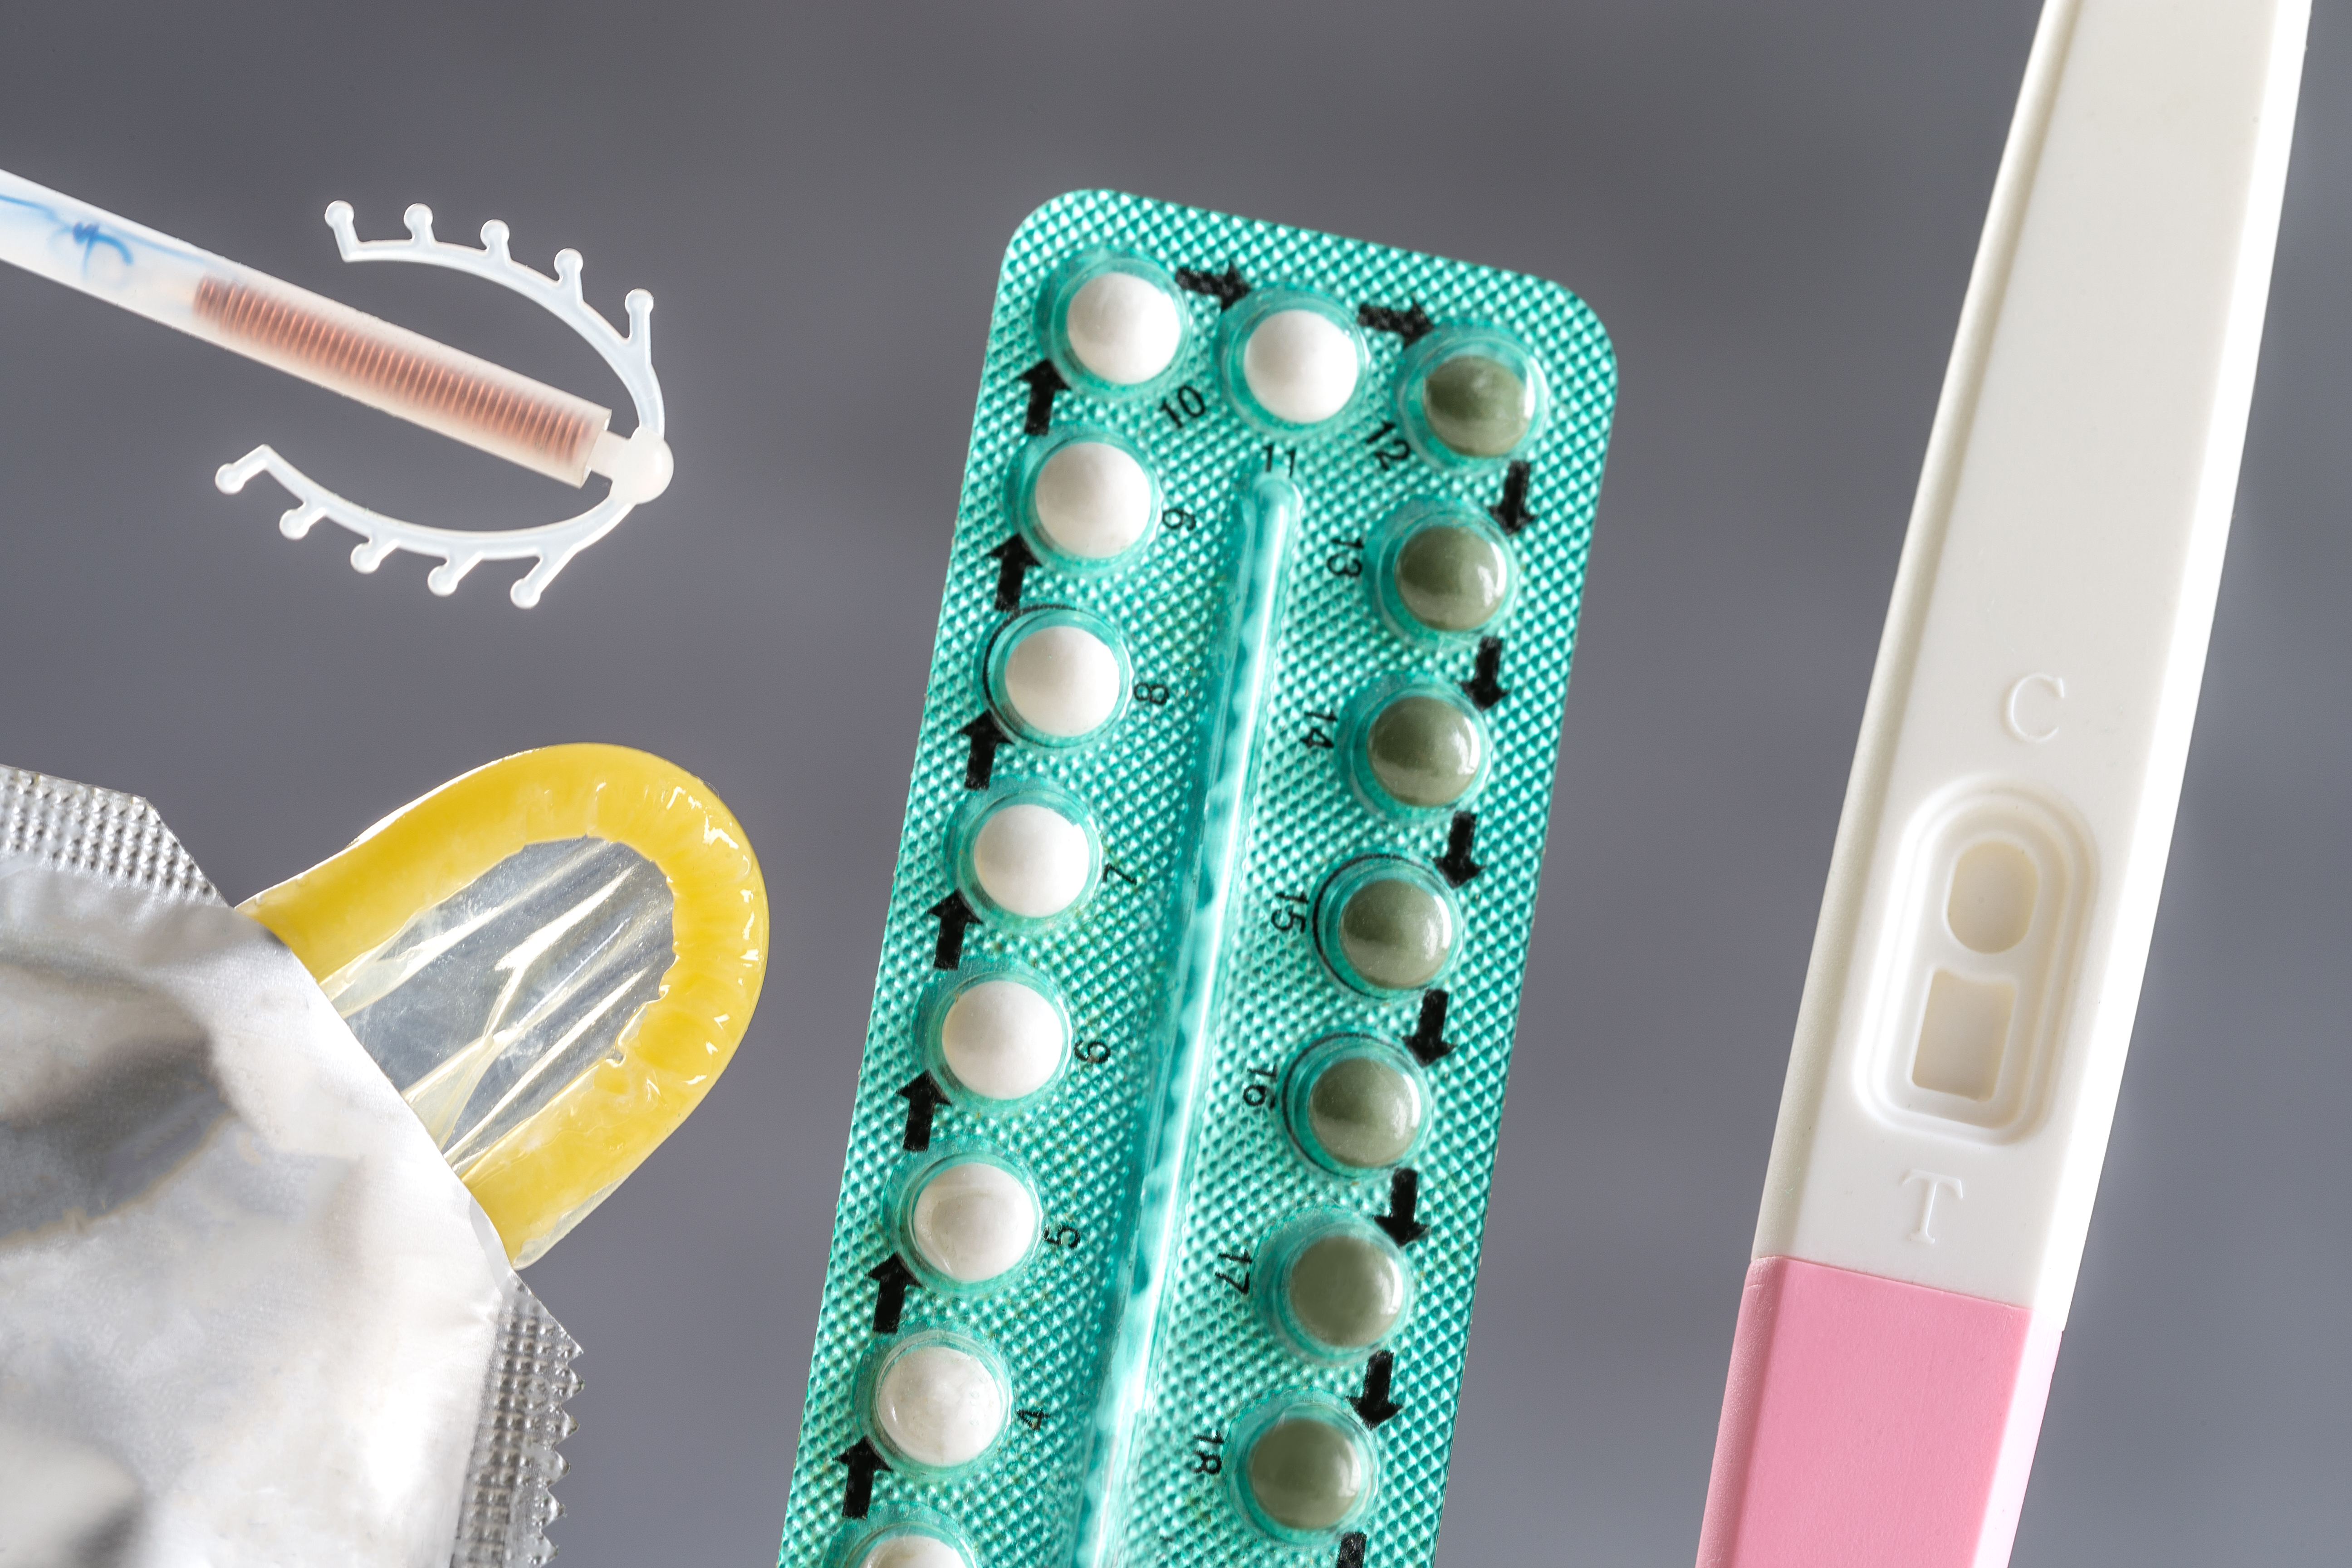 From birth control to contraception to pregnancy testing, the University Health Center offers a full range of reproductive health services in a confidential, convenient on-campus location.